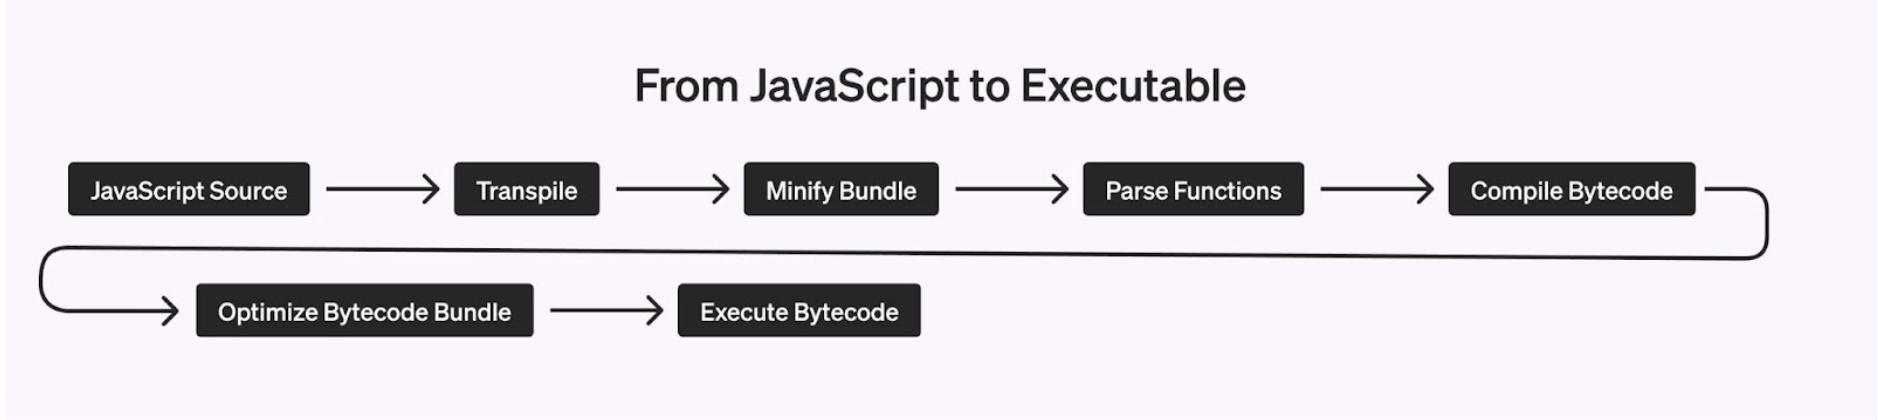 Flowchart titled "From JavaScript to Executable" that depicts the steps from compilation to execution elaborated on in the list. 